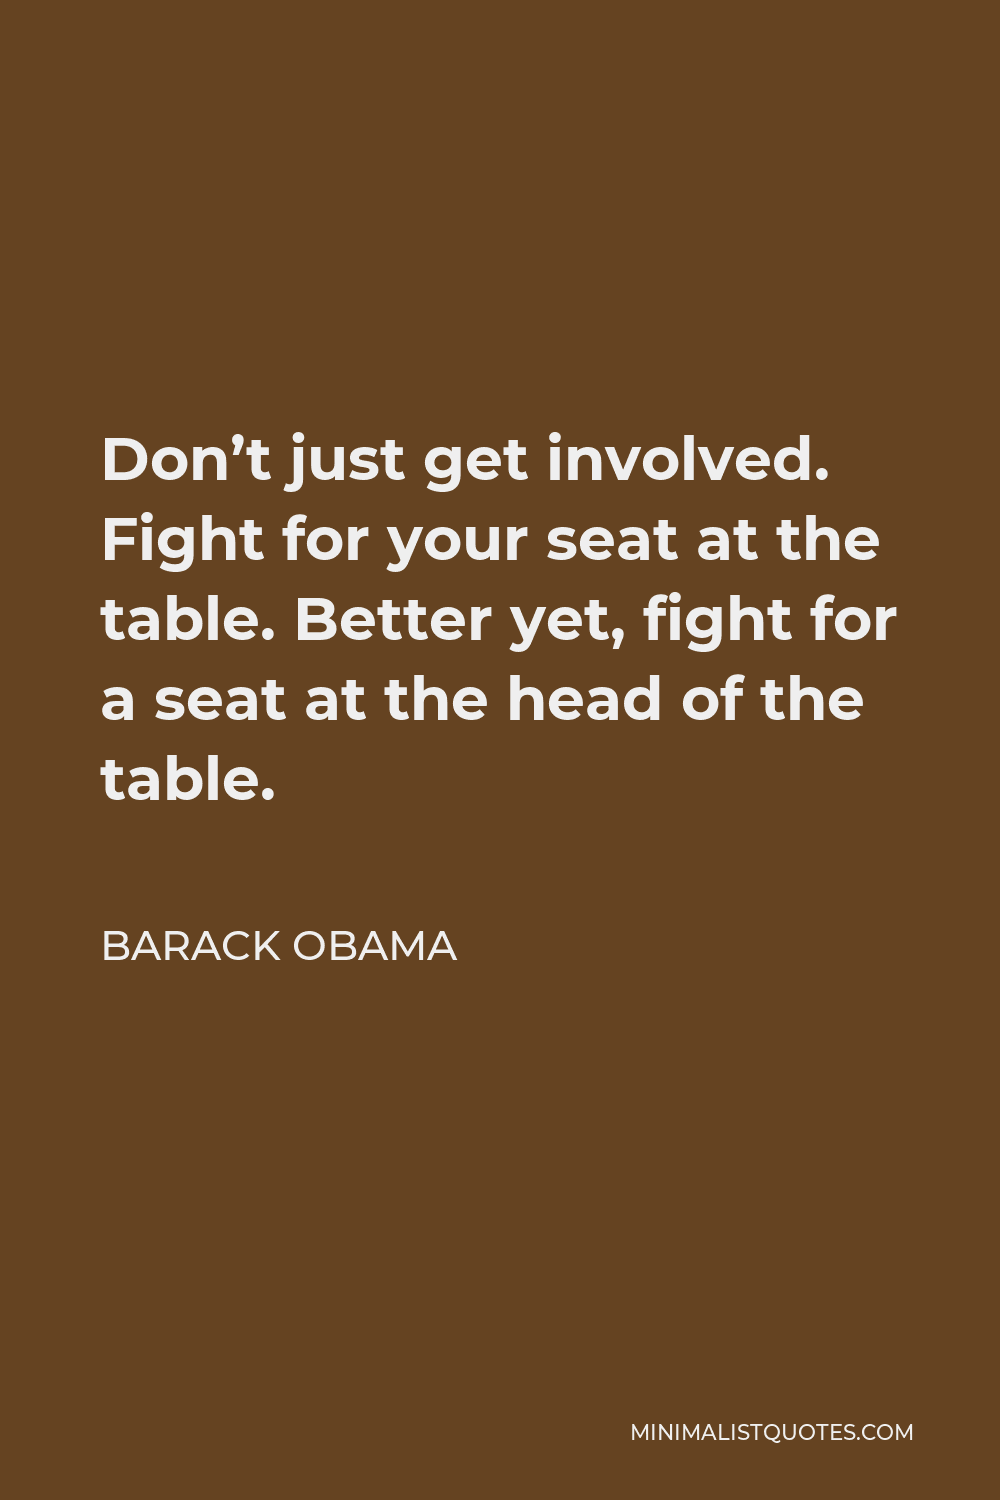 Barack Obama Quote - Don’t just get involved. Fight for your seat at the table. Better yet, fight for a seat at the head of the table.